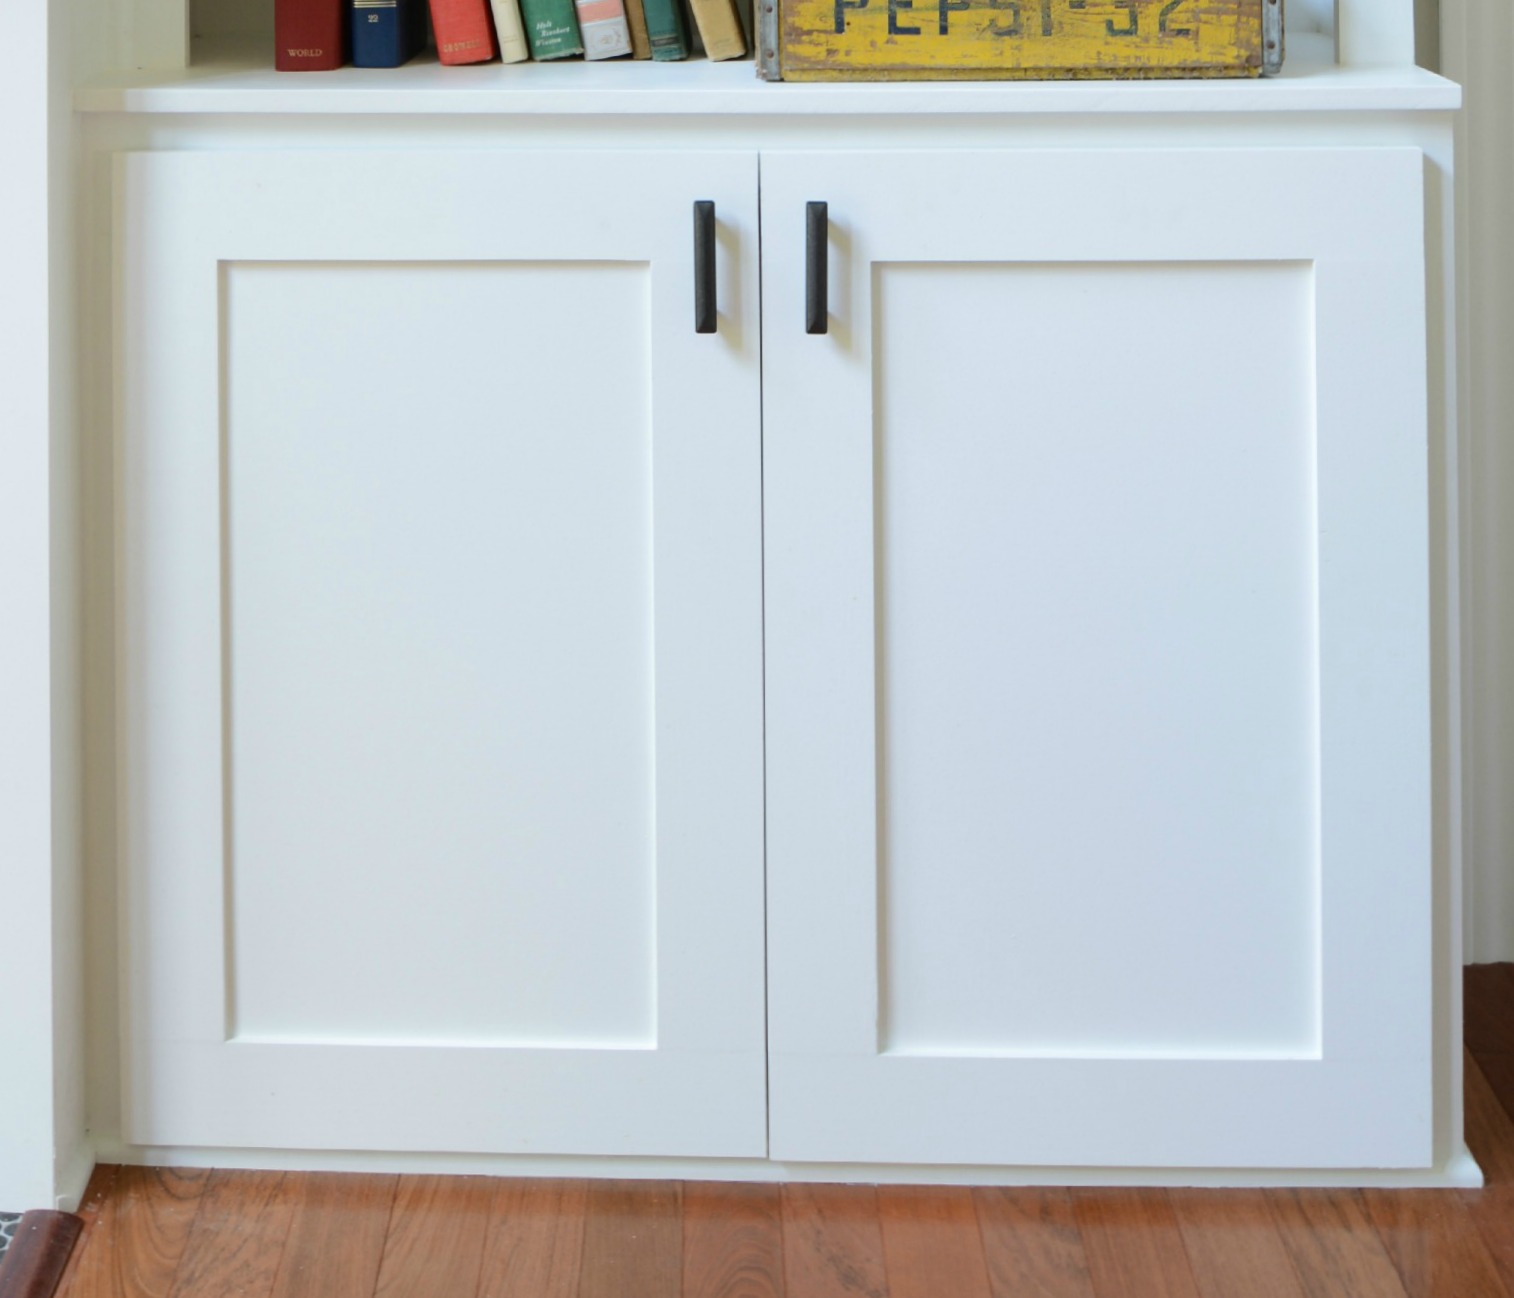 How To Build A Cabinet Door Decor And The Dog